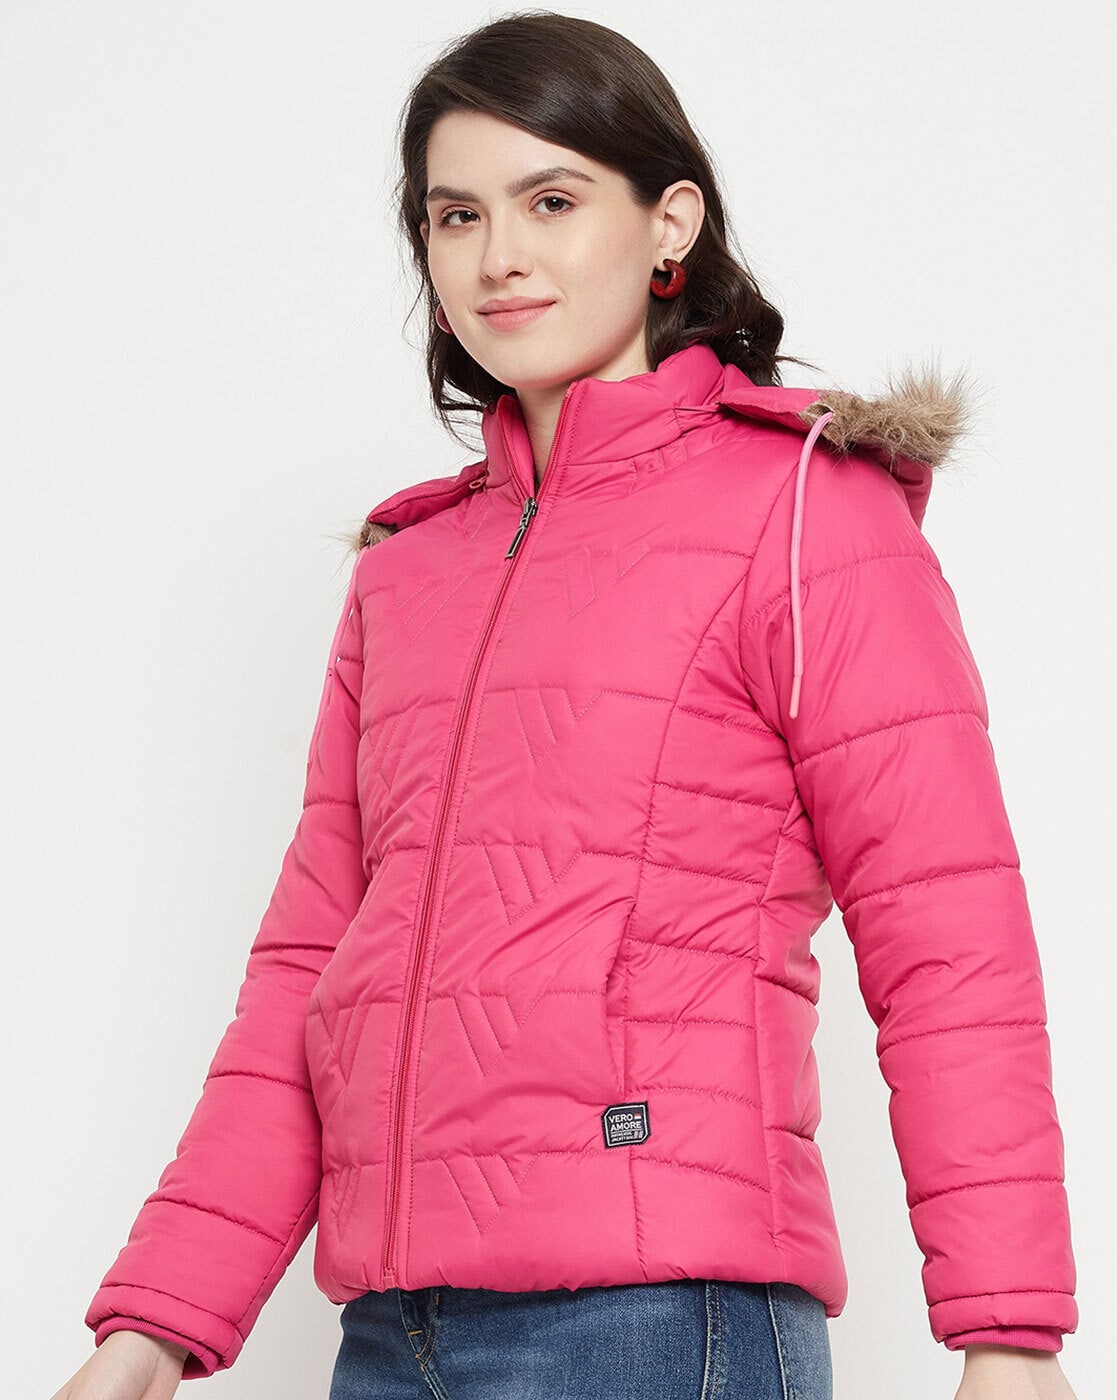 Vero Moda Vmreese Coat Ga Boos - 20.00 €. Buy Quilted jackets from Vero  Moda online at Boozt.com. Fast delivery and easy returns